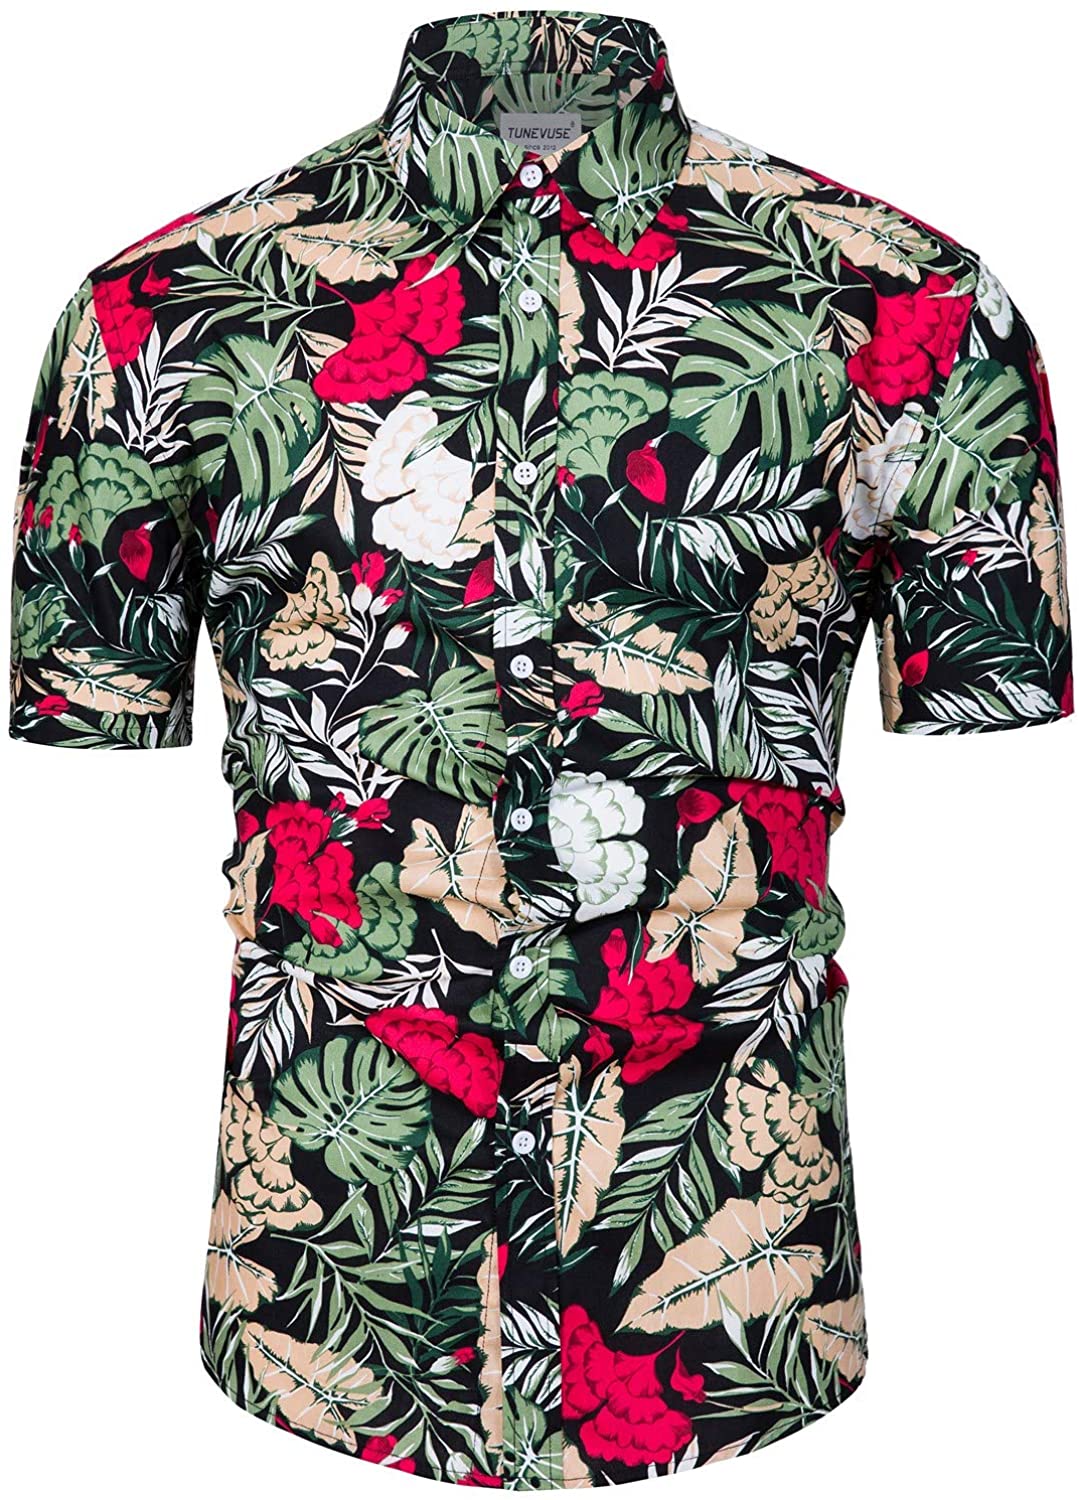 TUNEVUSE Mens Hawaiian Short Sleeve Shirt Suits Flower Print Suits Tropical 2PC Sets Button Down Shirts and Shorts Outfit 